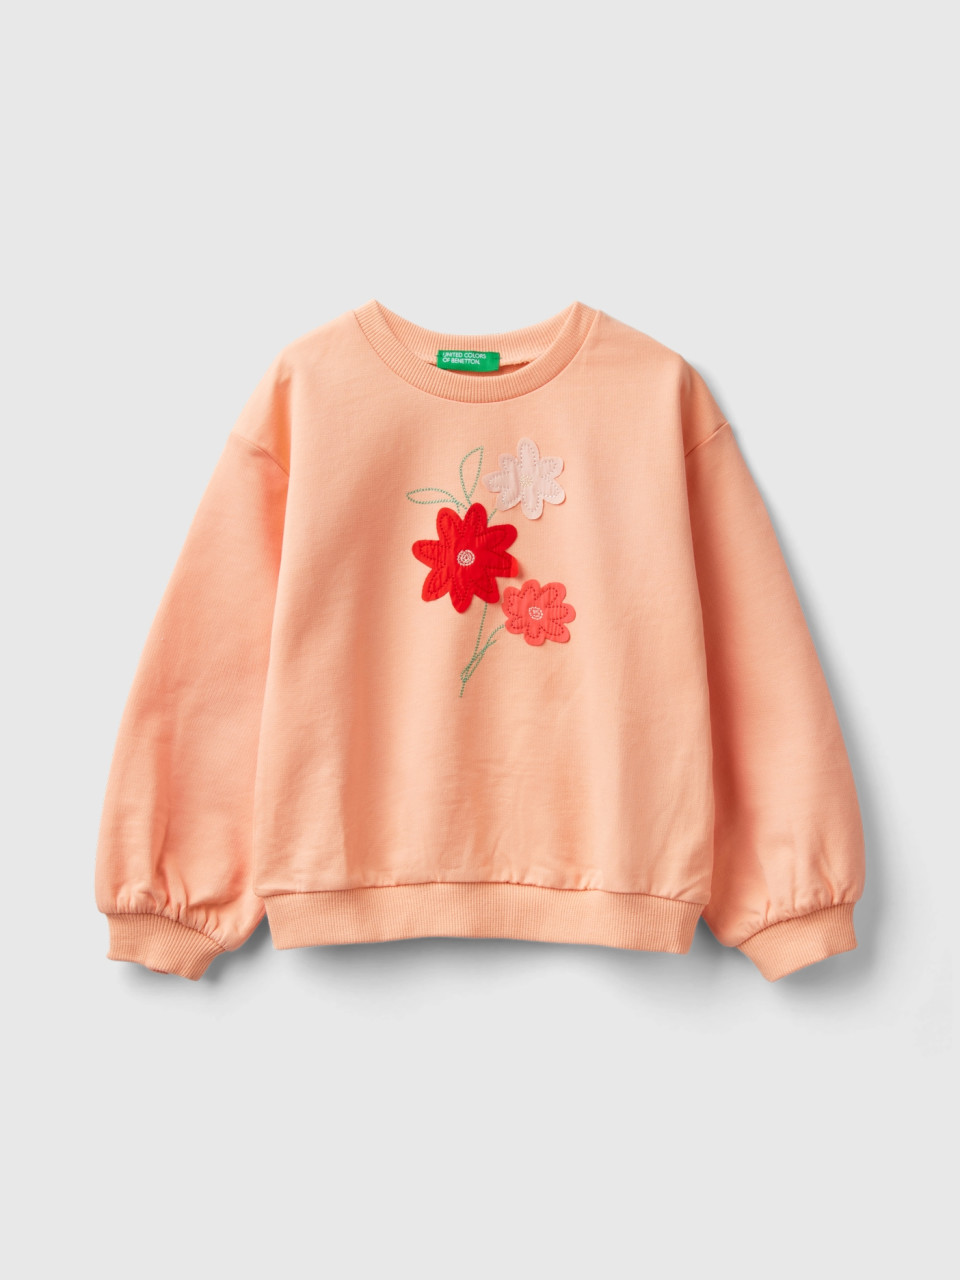 Benetton, Sweatshirt With Floral Embroidery, Peach, Kids